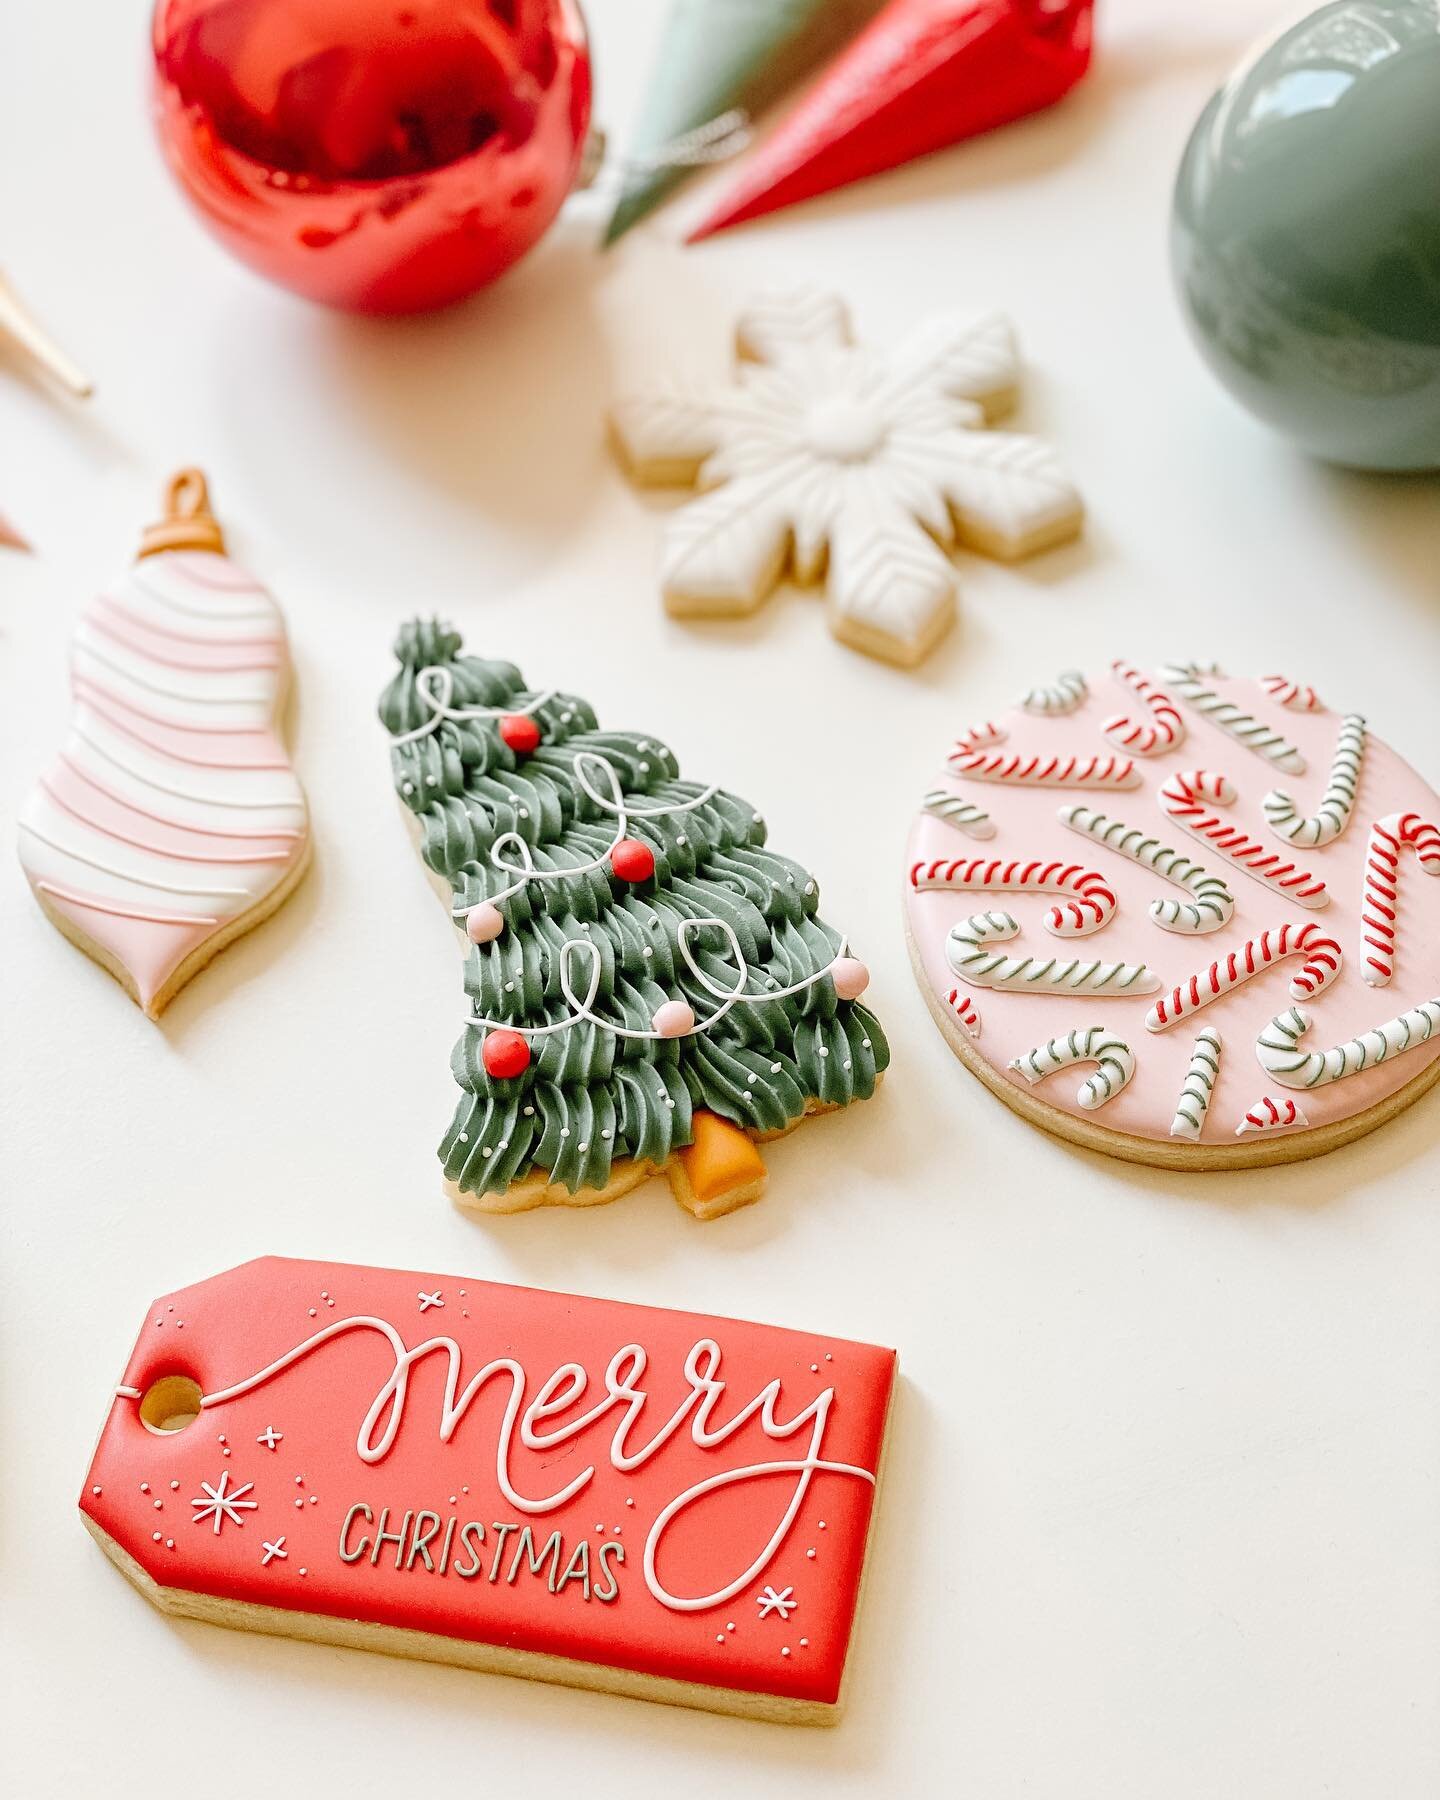 🎄✨ today! ✨🎄

My pay-what-you-can beginner class is here! Join me this afternoon to learn all of this:

- mixing royal icing from scratch
- nailing royal icing consistencies (four of them!)
- colouring your icing
- perfect flooding
- satisfying tex